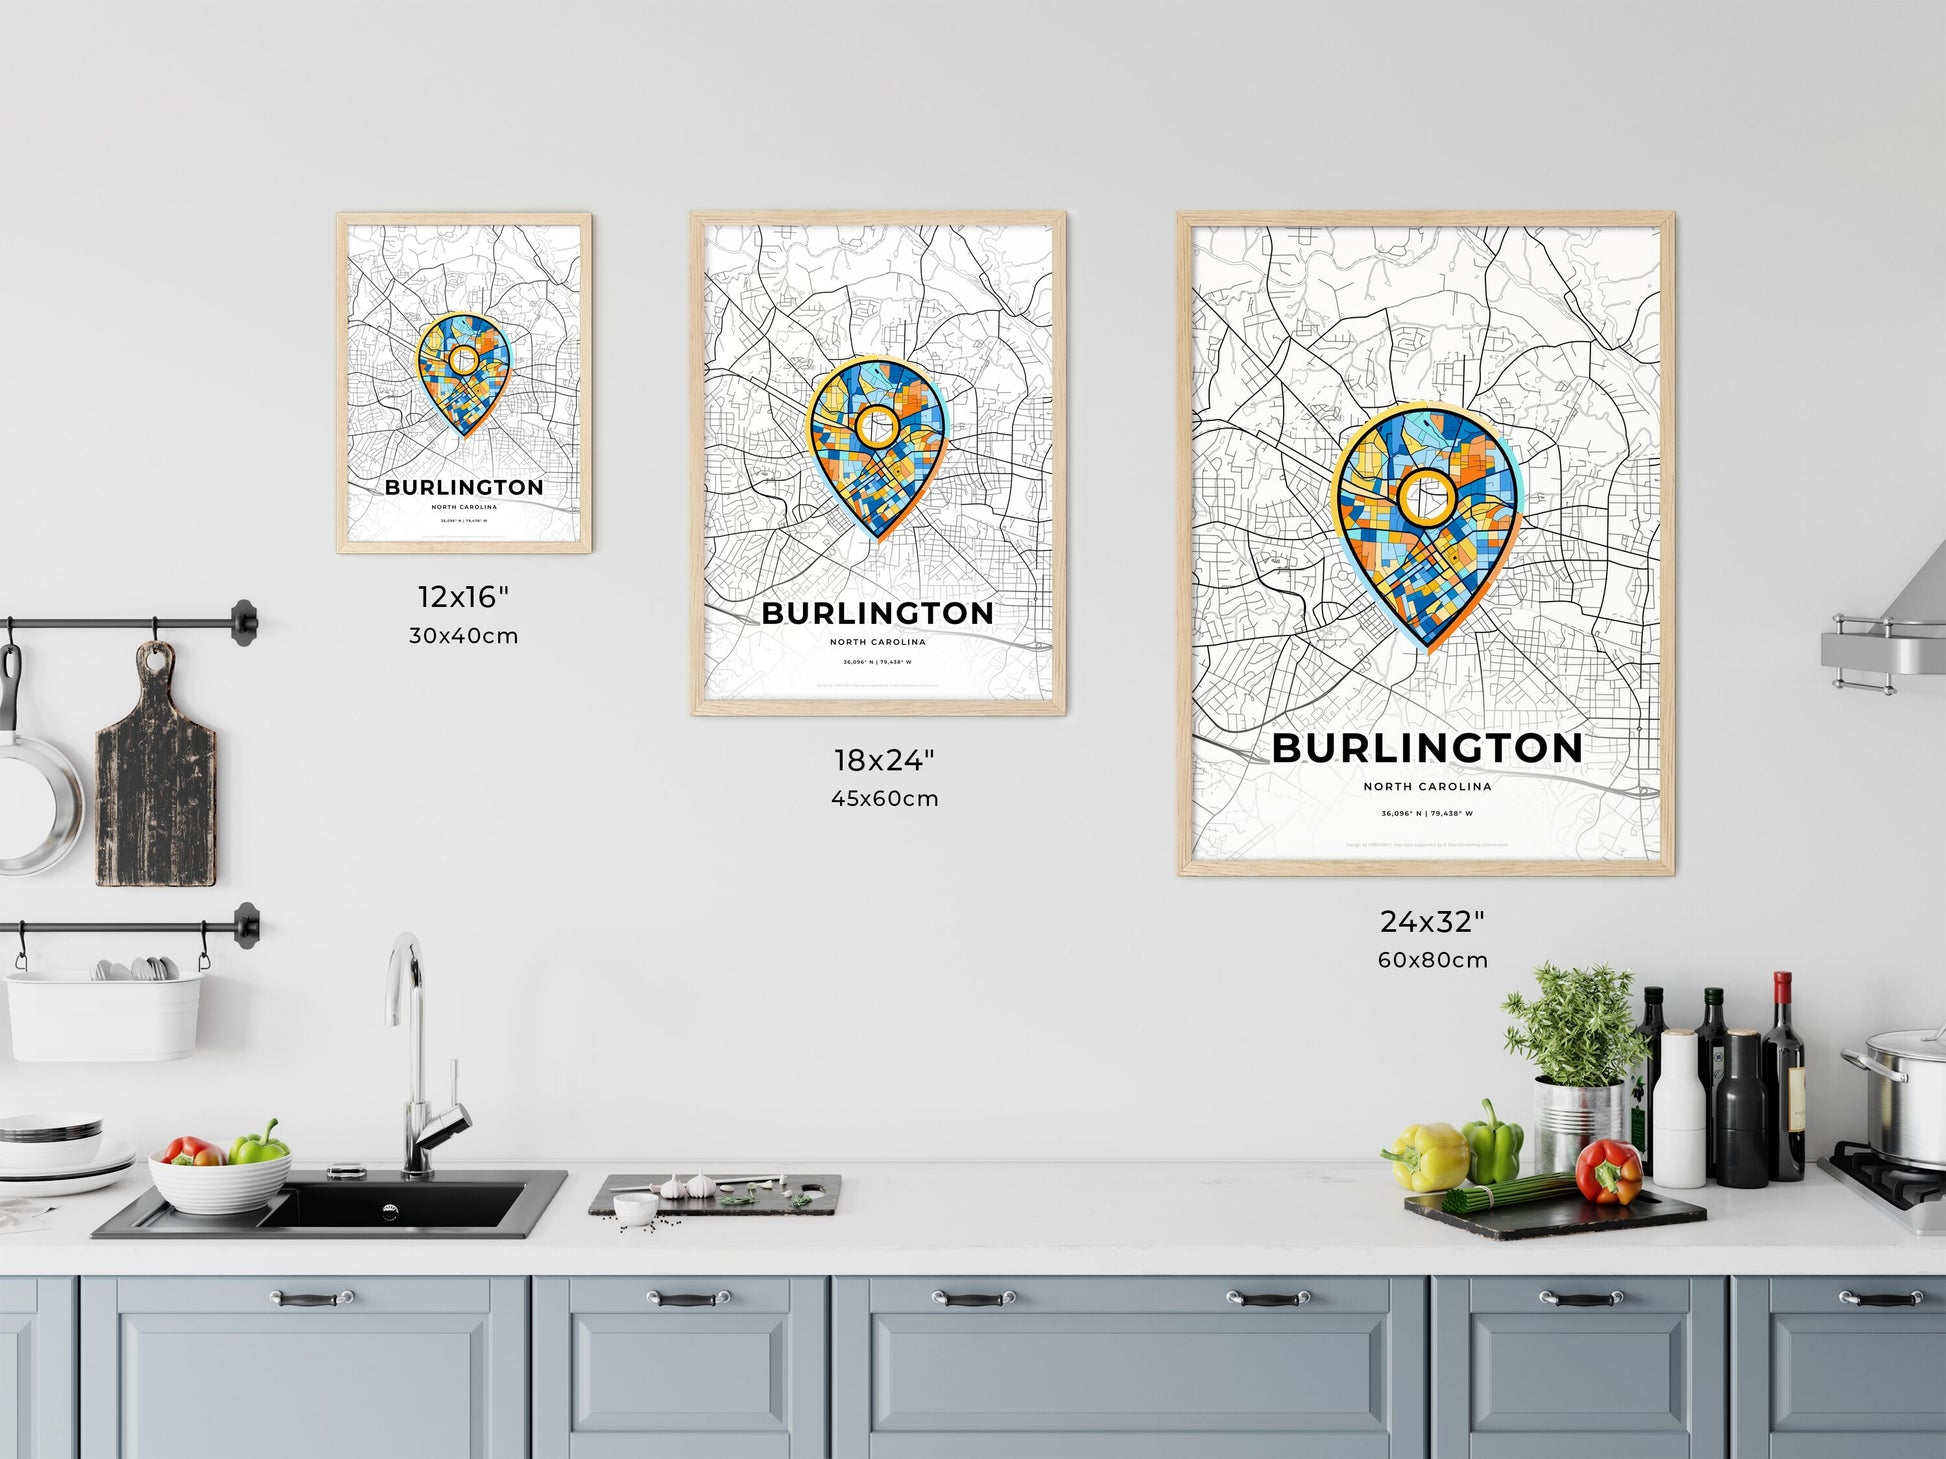 BURLINGTON NORTH CAROLINA minimal art map with a colorful icon. Where it all began, Couple map gift.